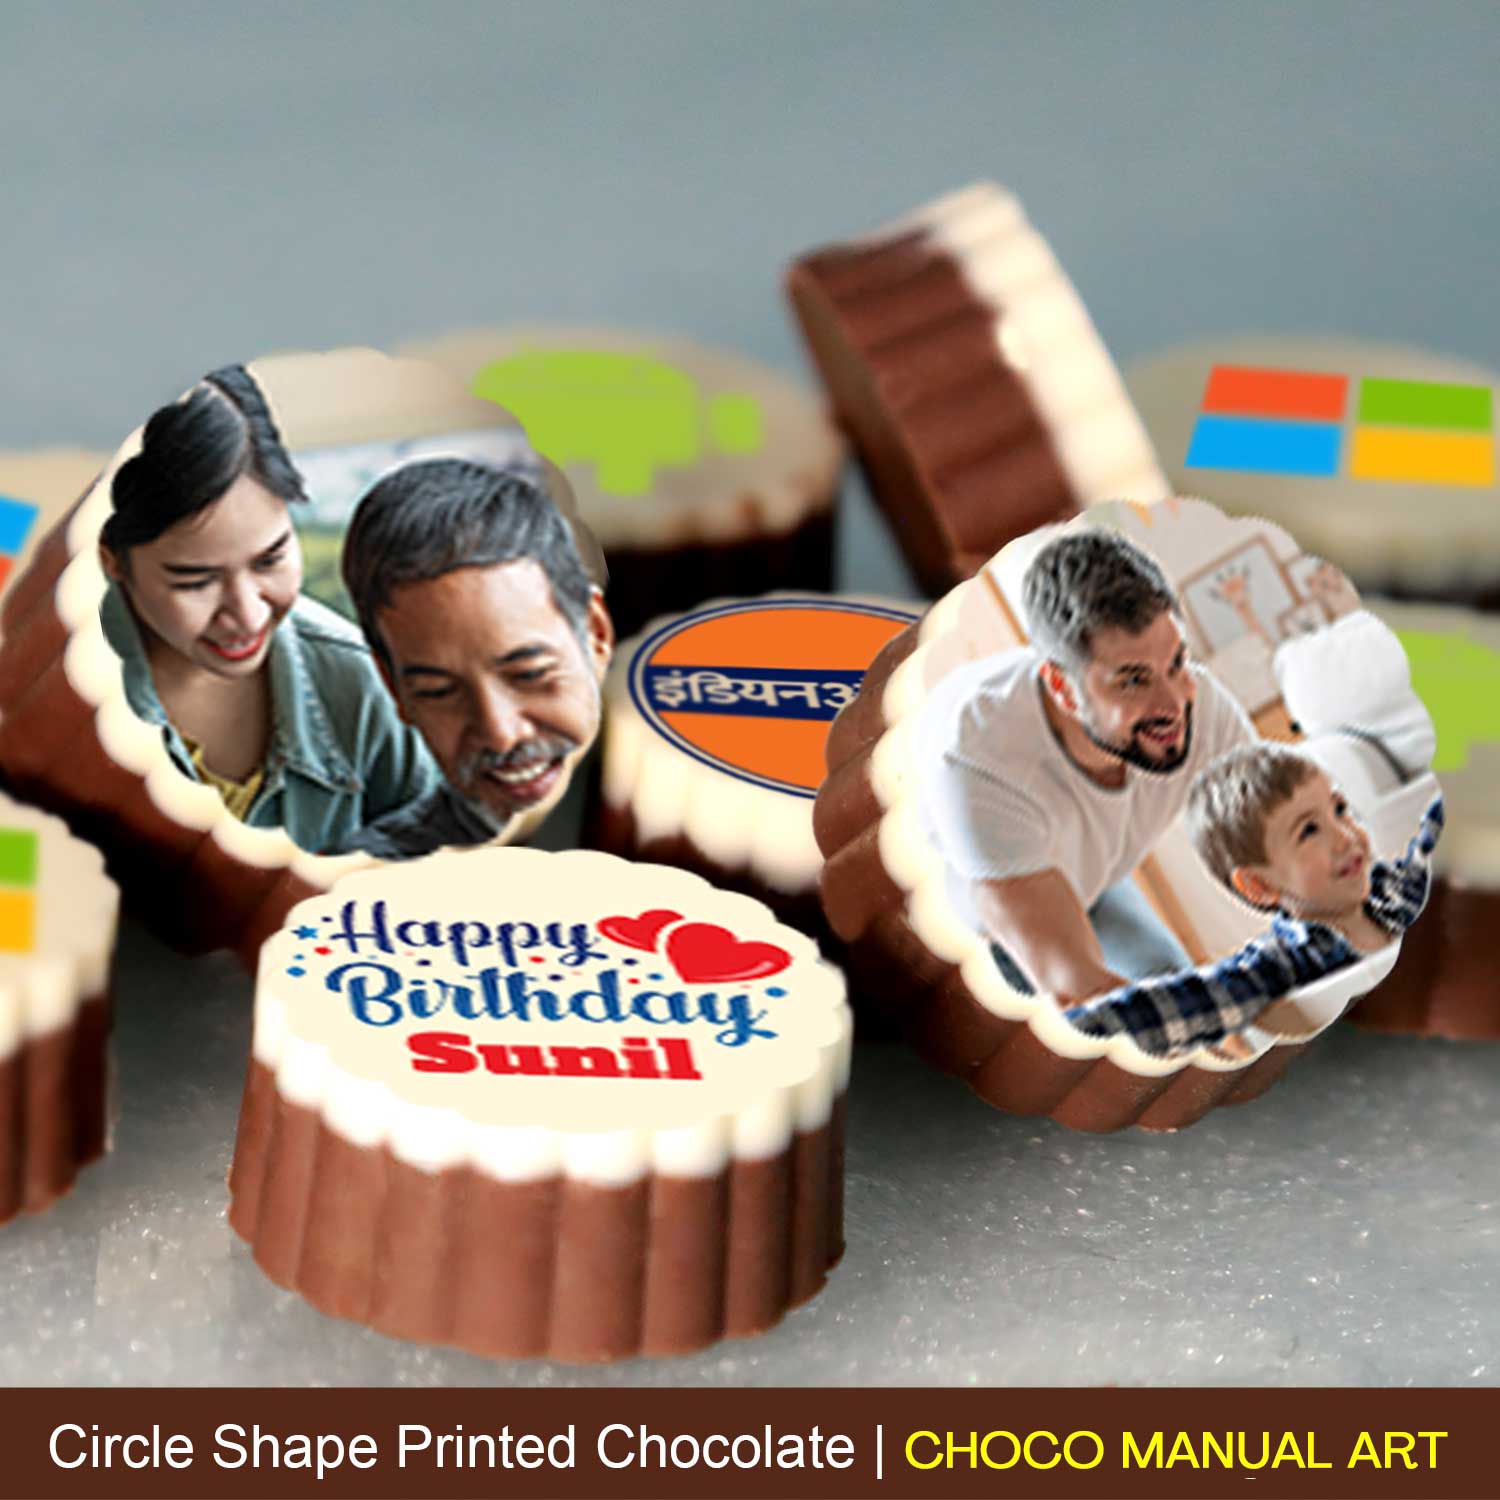 Fist bump clipart printed father's day chocolates